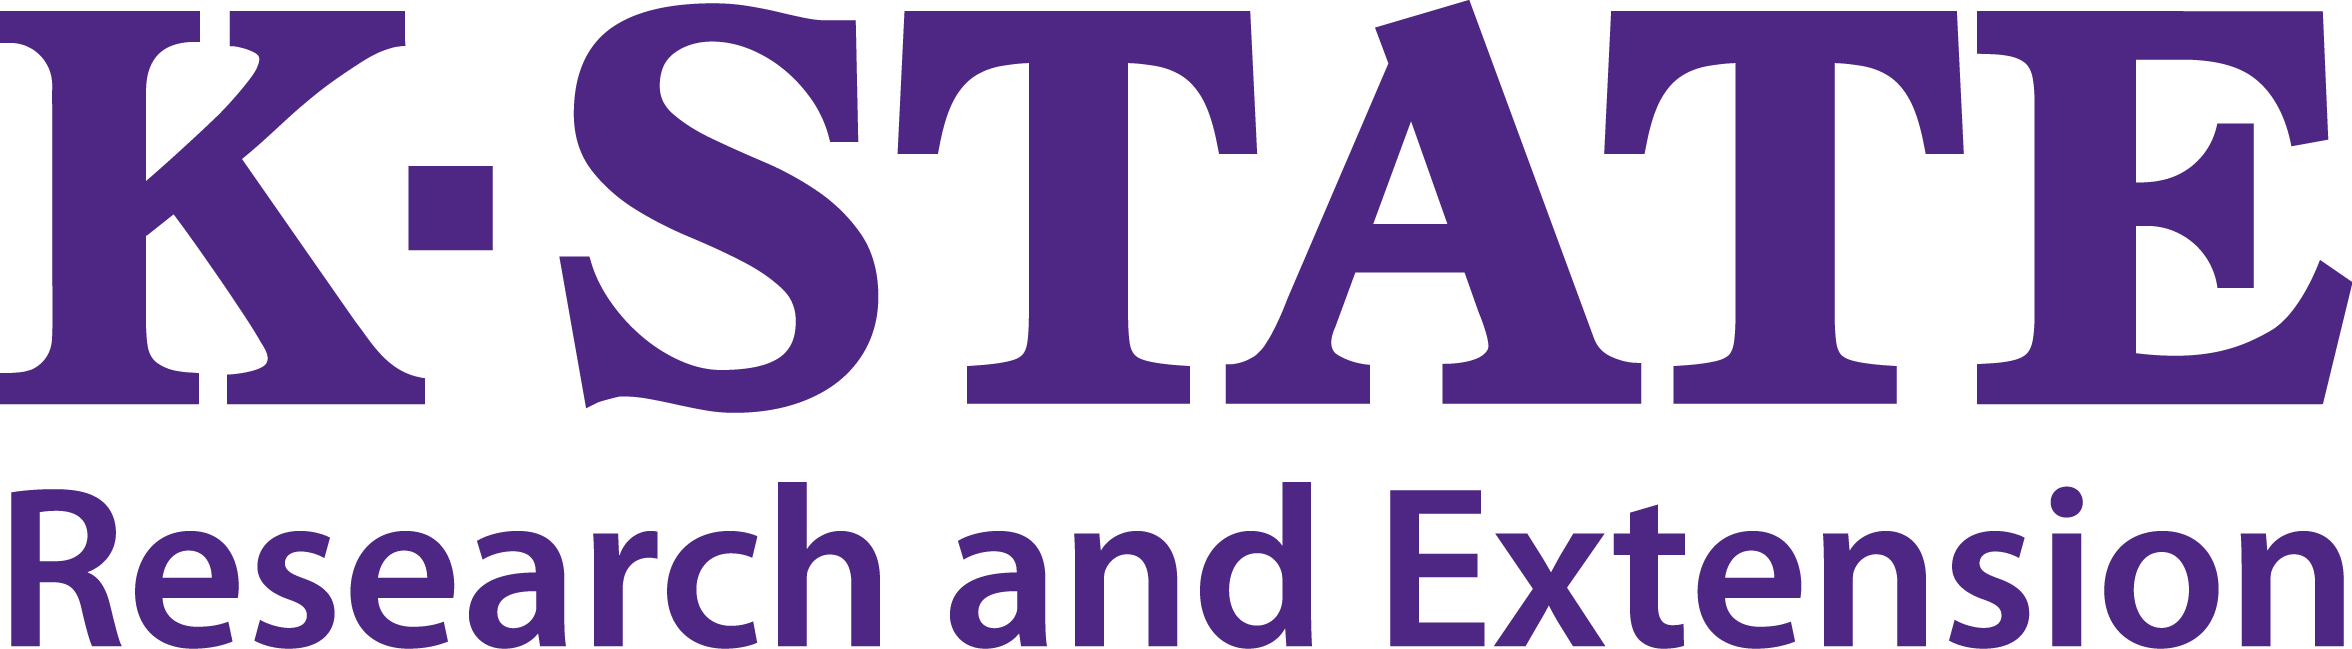 K-State Research and Extension 